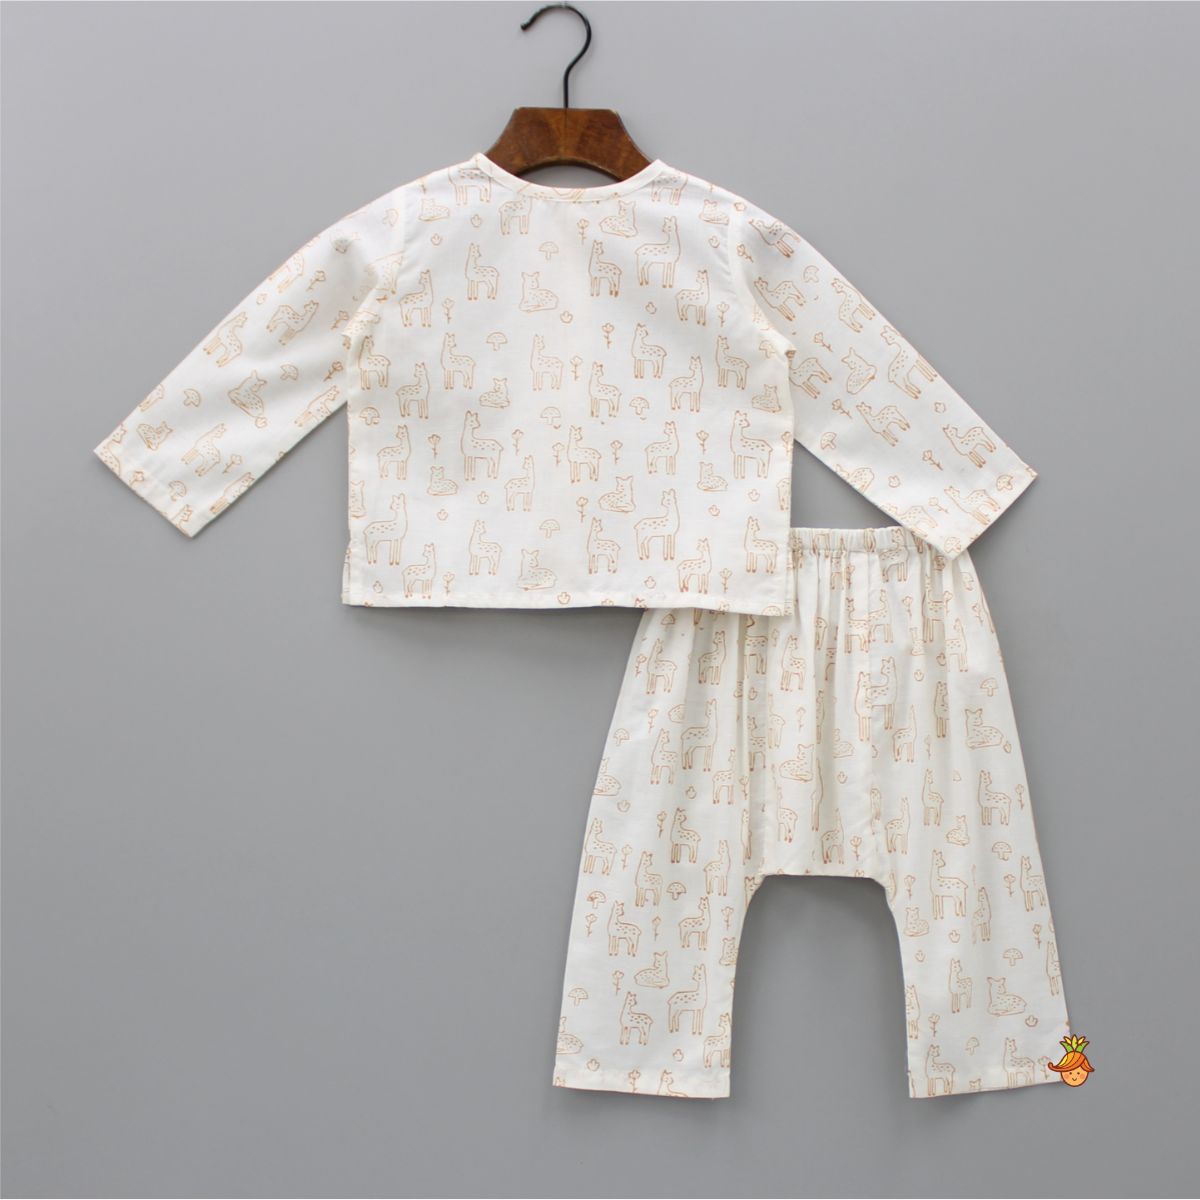 Deer Printed Cream Cotton Top And Pant